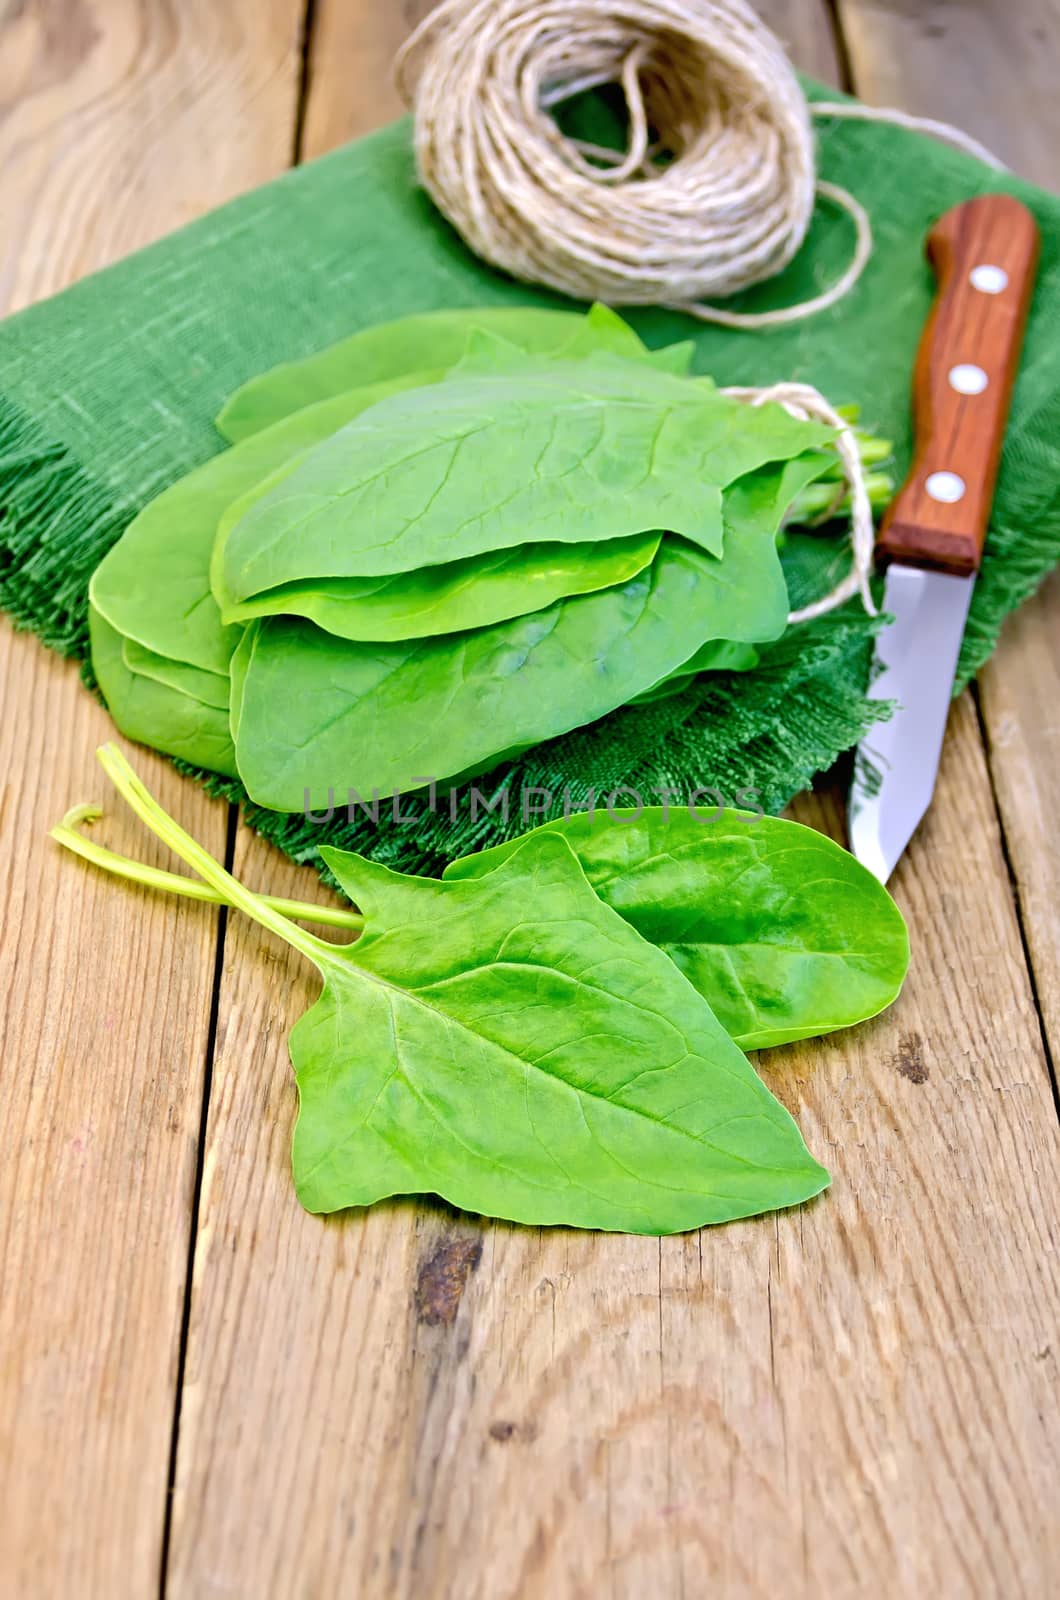 Spinach on board with knife and napkin by rezkrr